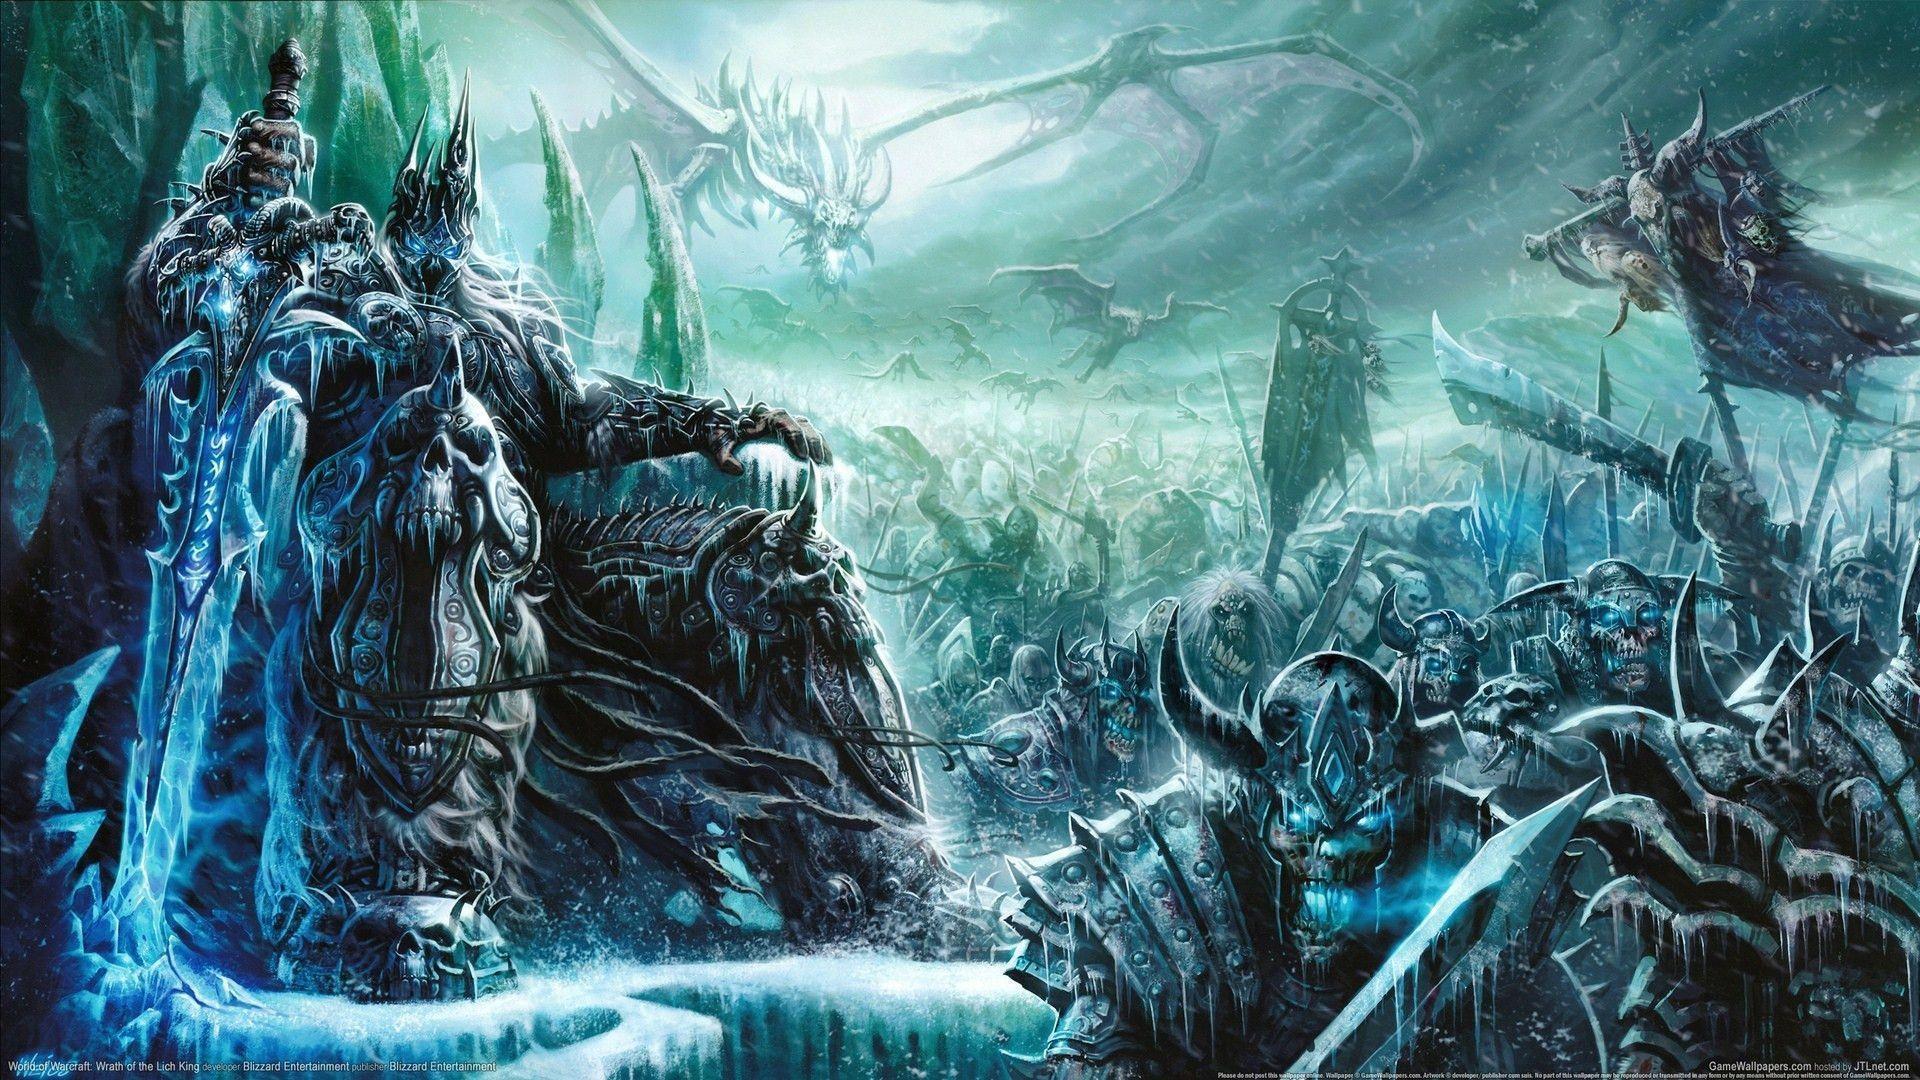 World of Warcraft Wrath of the Lich King Wallpaper. HD Wallpaper